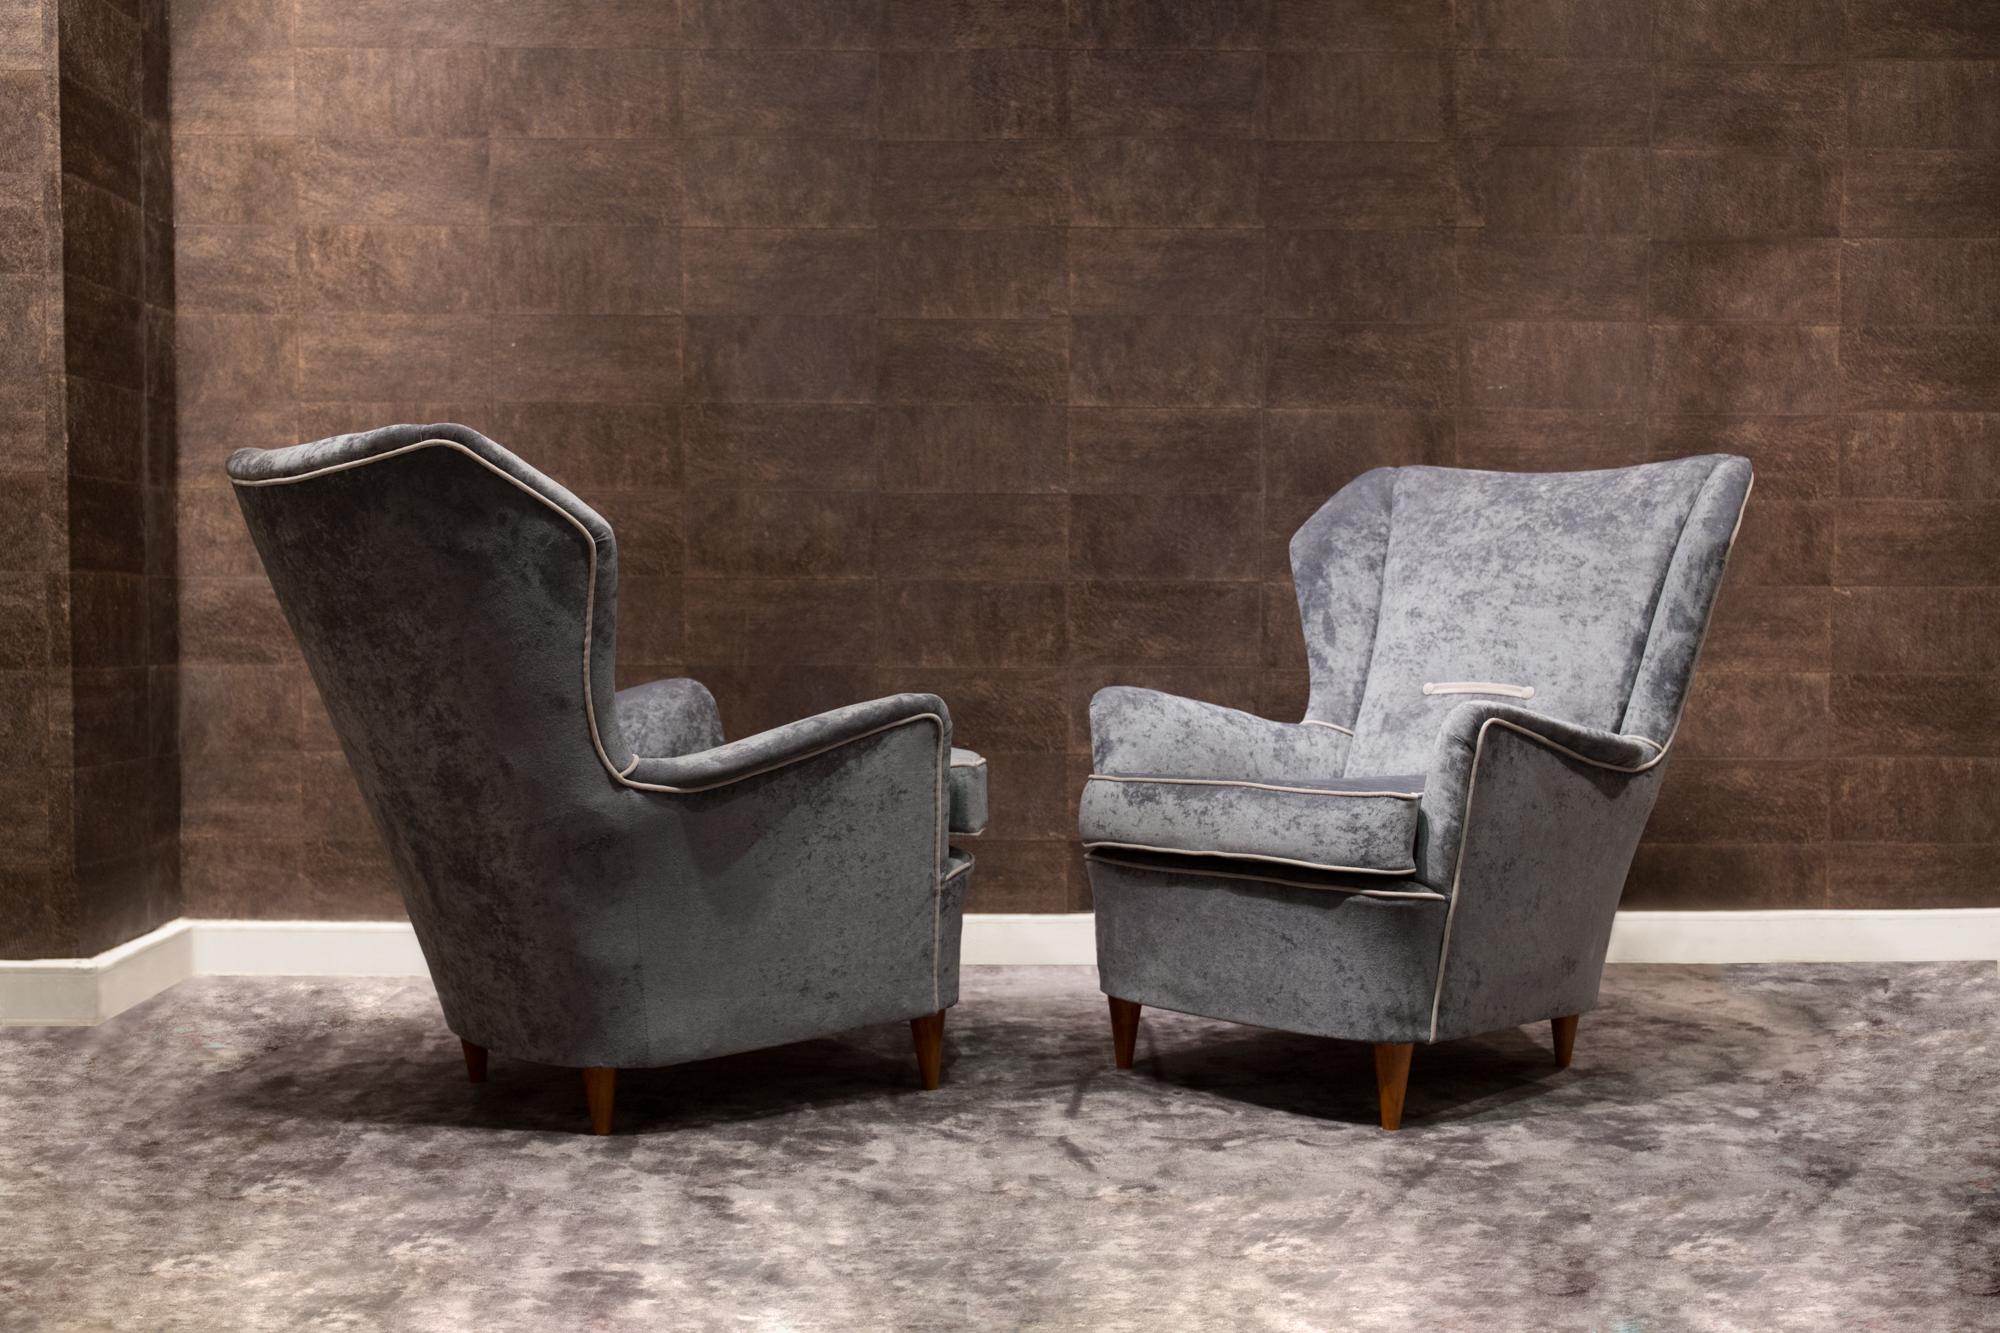 Designer armchairs produced in Italy in the 1940s in the style of Gio Ponti.
Recently upholstered with a high quality velvet fabric.
Wood legs and very comfortable high back armchairs.
In the image gallery, you can find two photos of the armchairs